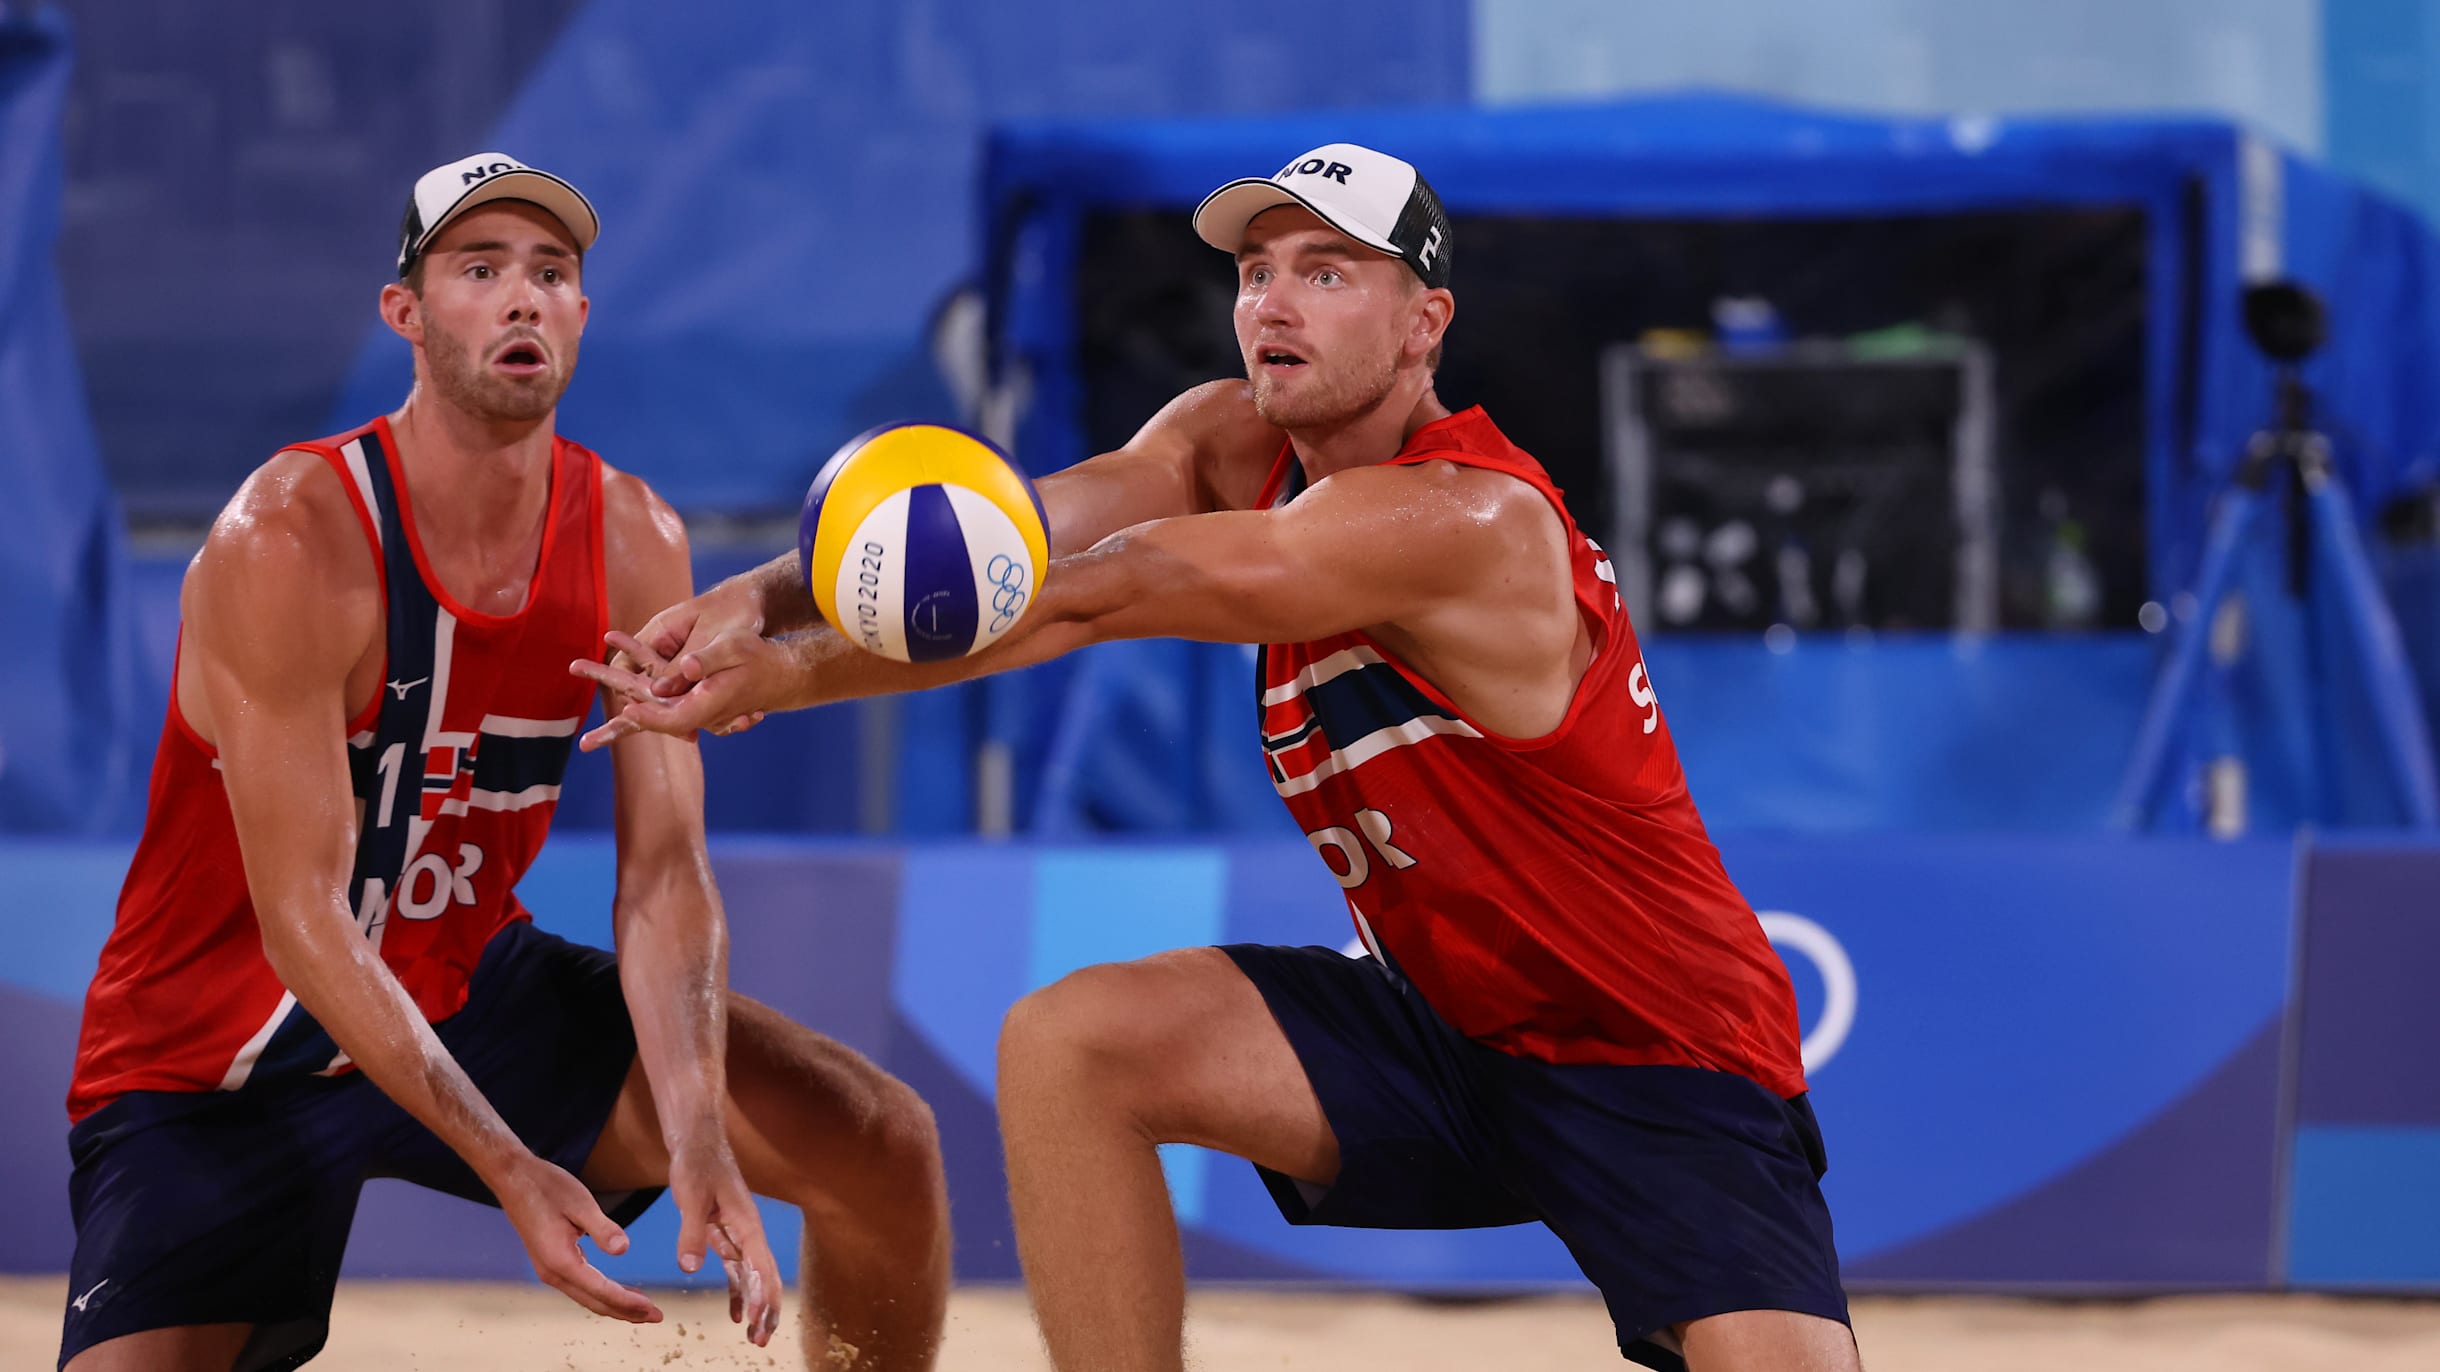 How to qualify for beach volleyball at Paris 2024